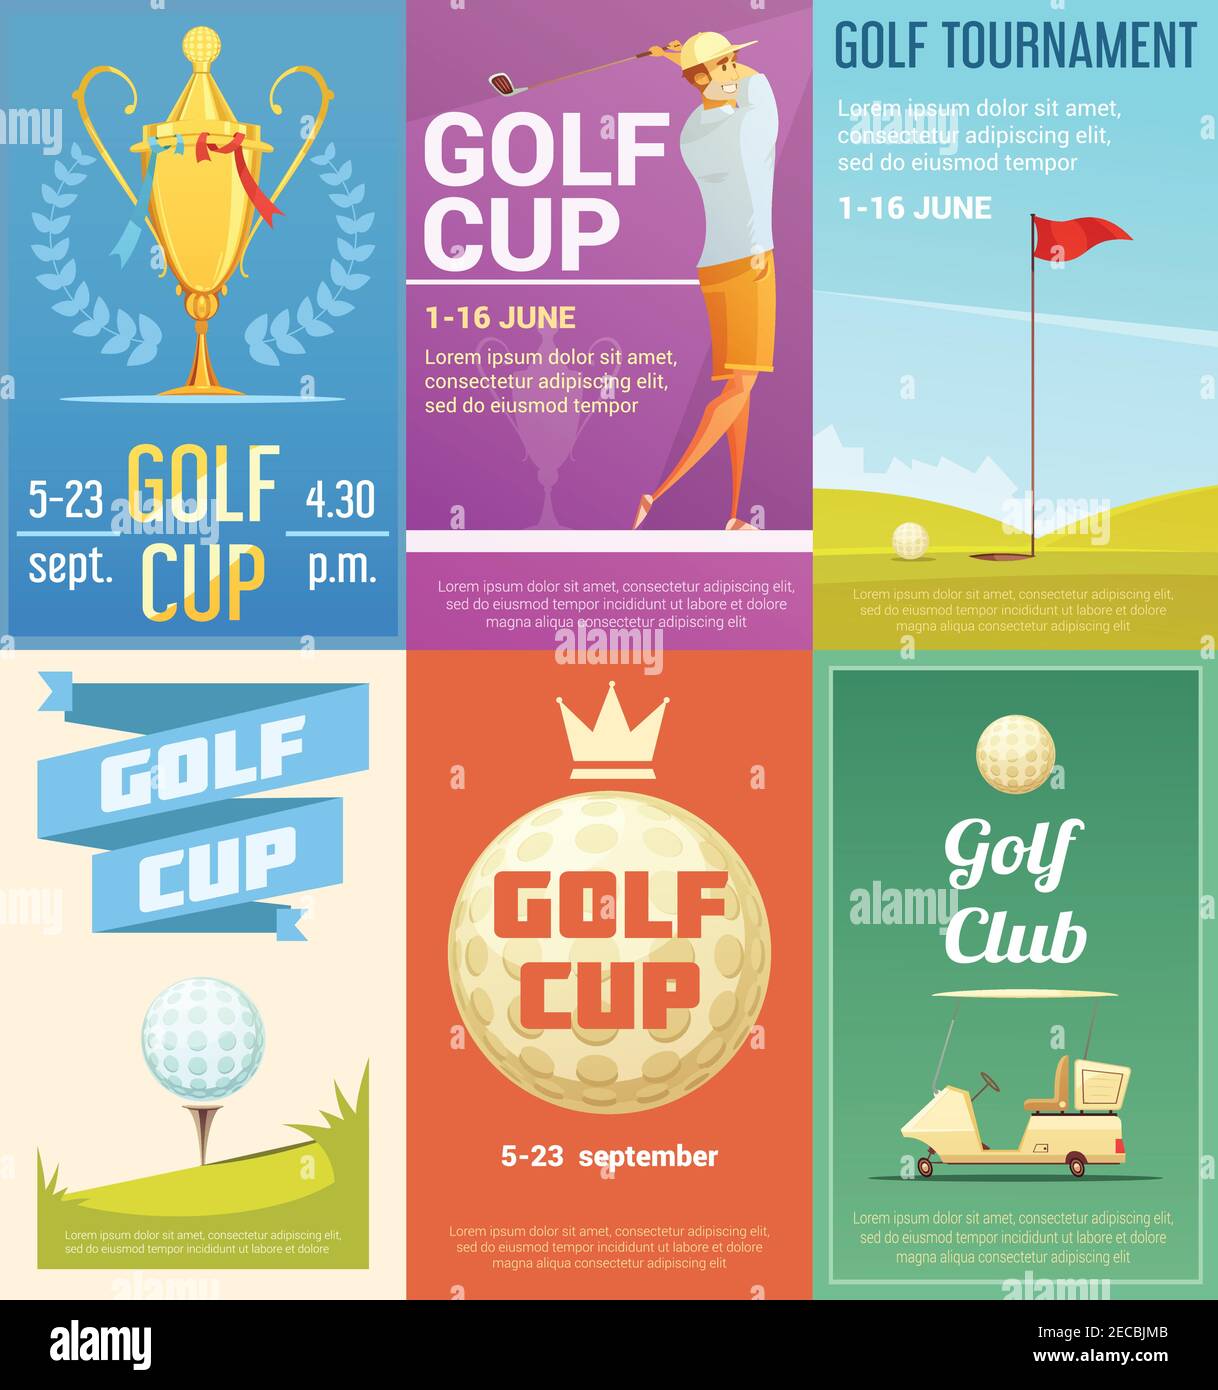 Golf club advertisement retro style posters collection with gold cup tournament winner trophy cartoon isolated vector illustration Stock Vector